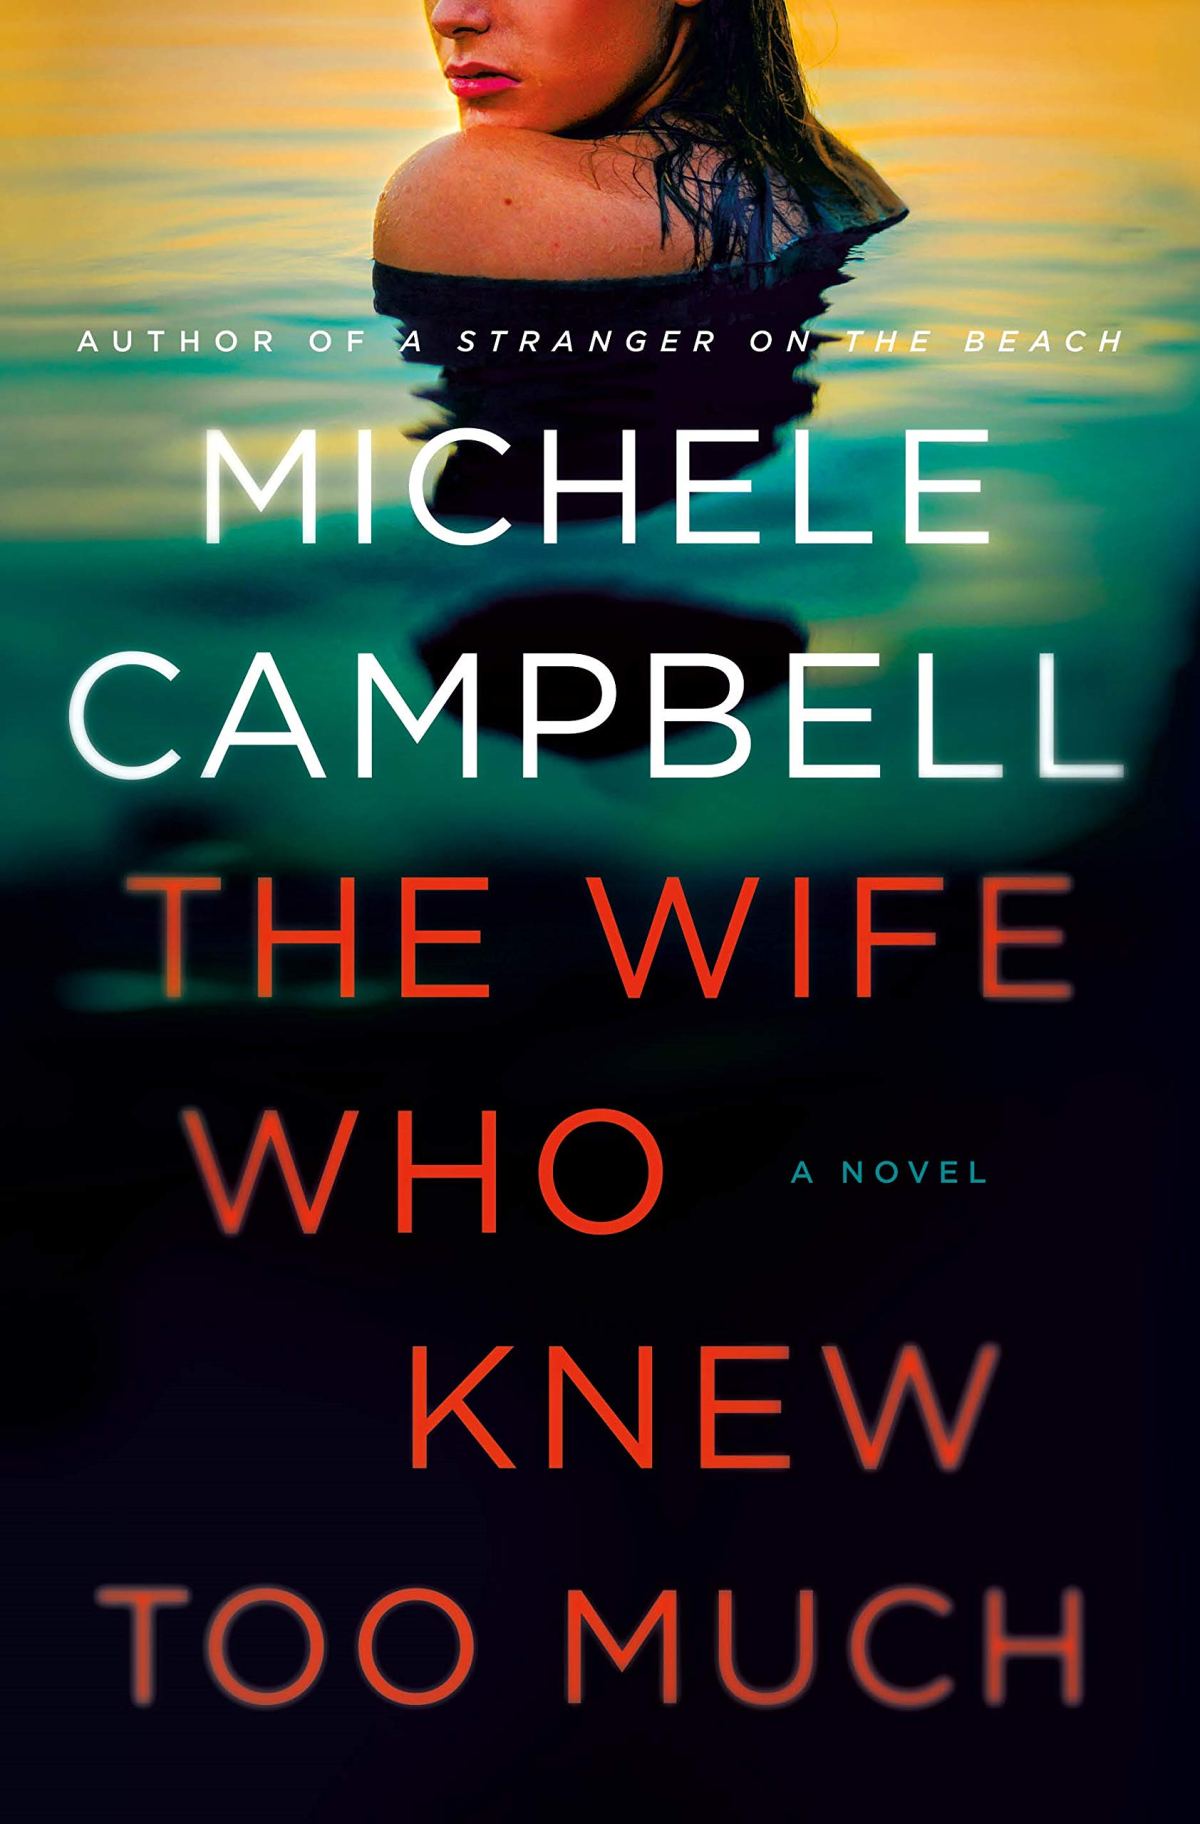 Book 10 – The Wife Who Knew Too Much by Michele Campbell